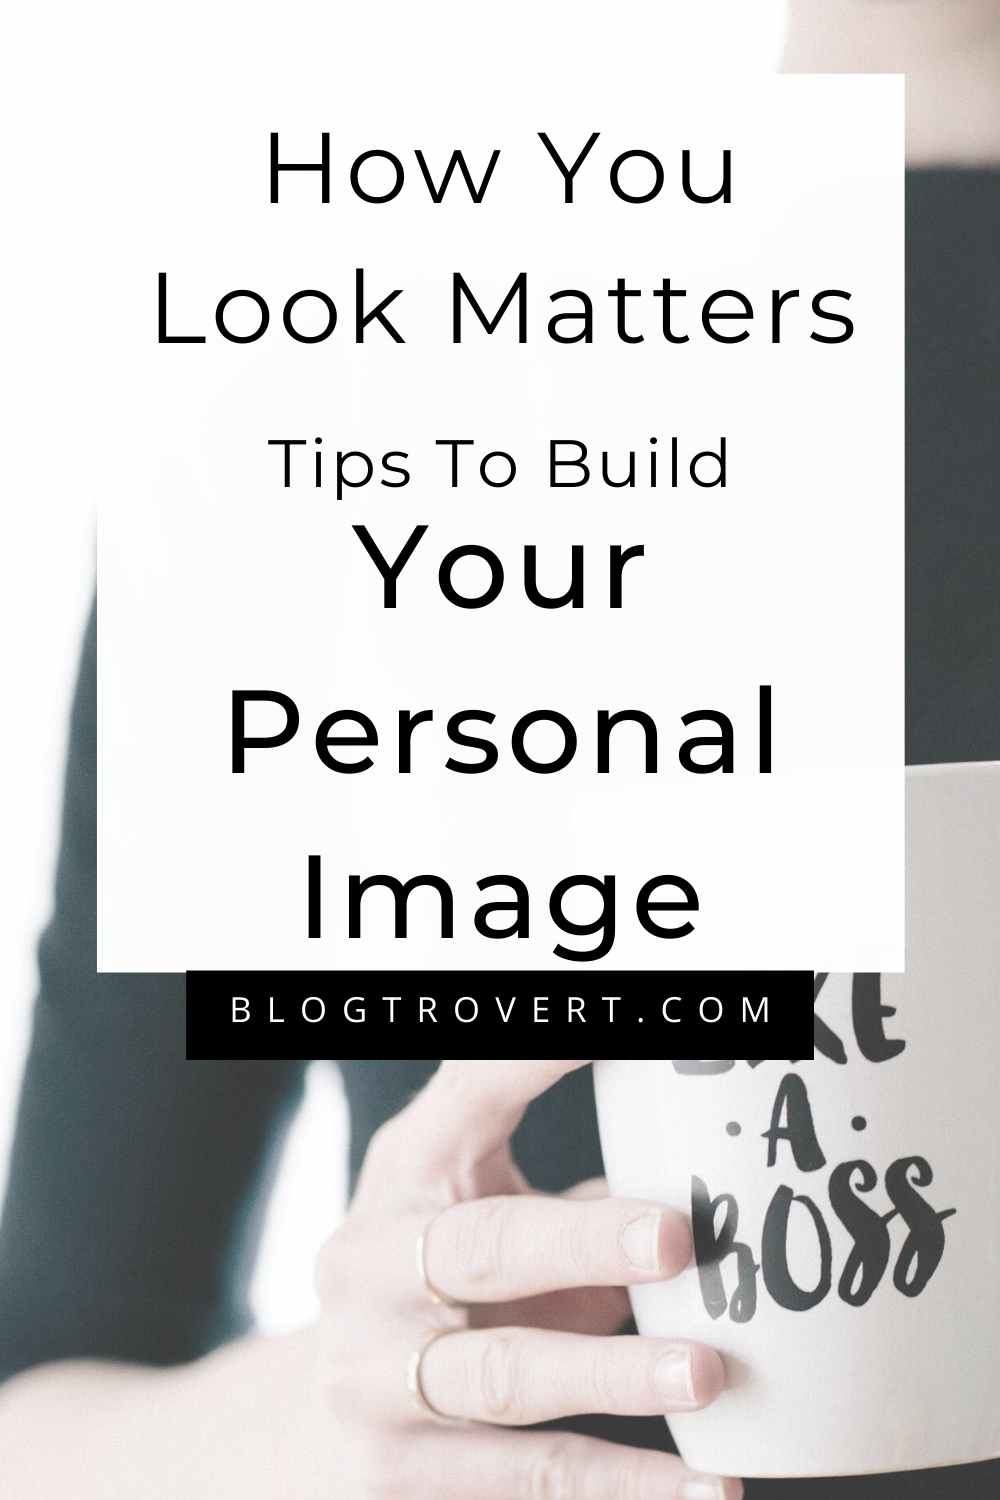 How To Build Your Personal Image; 6 Helpful Steps 5